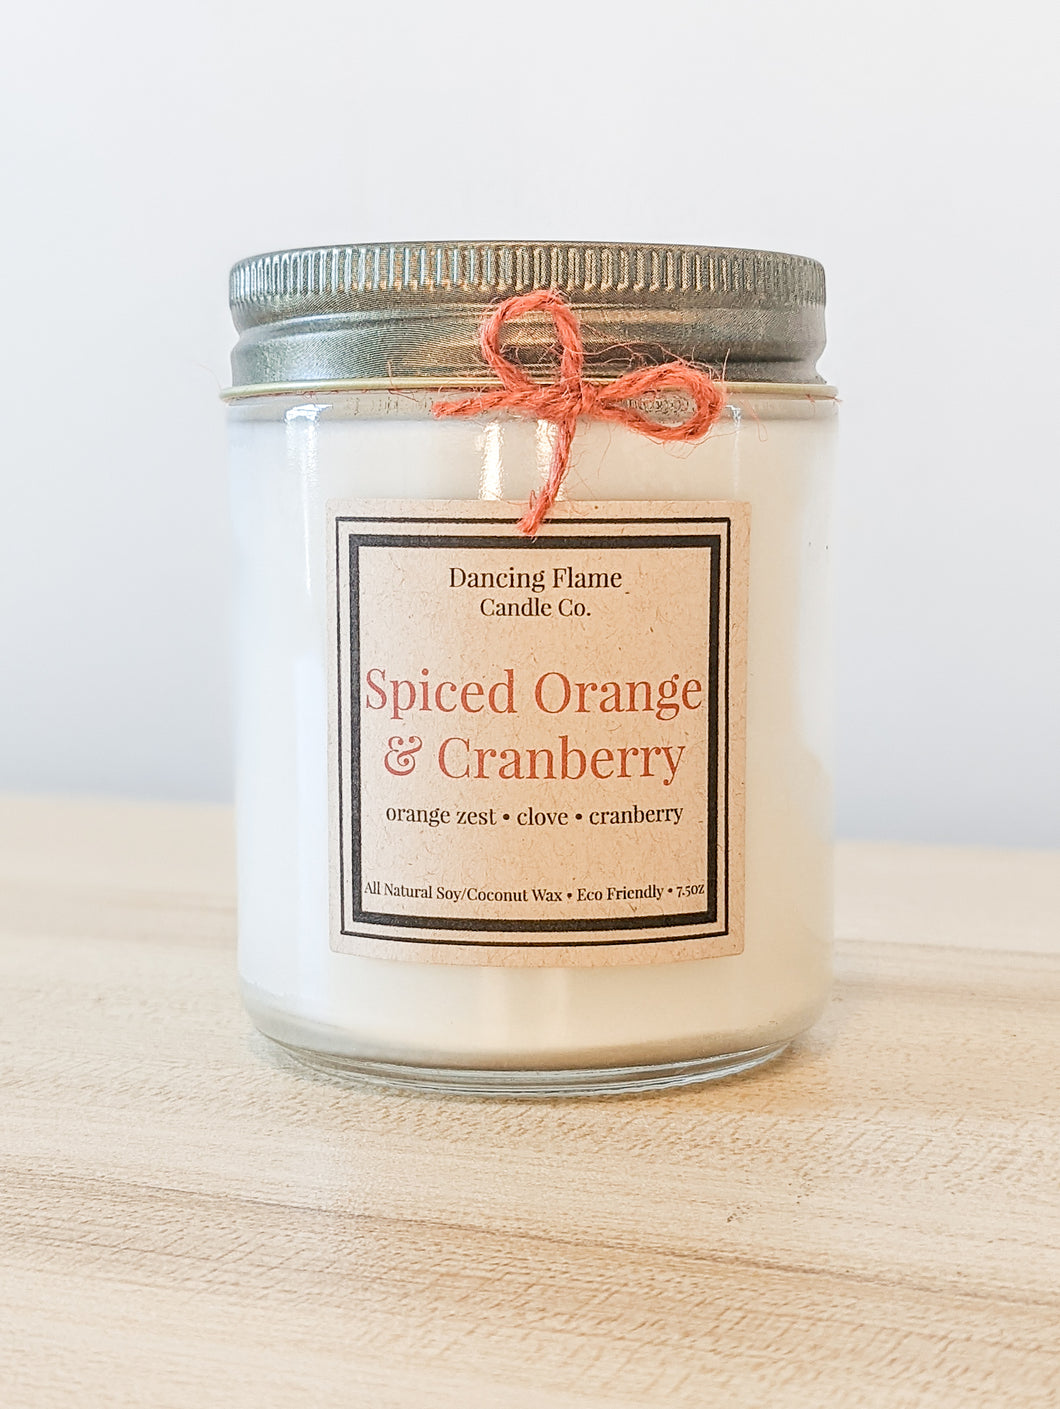 Spiced Orange & Cranberry Soy Wax Candle